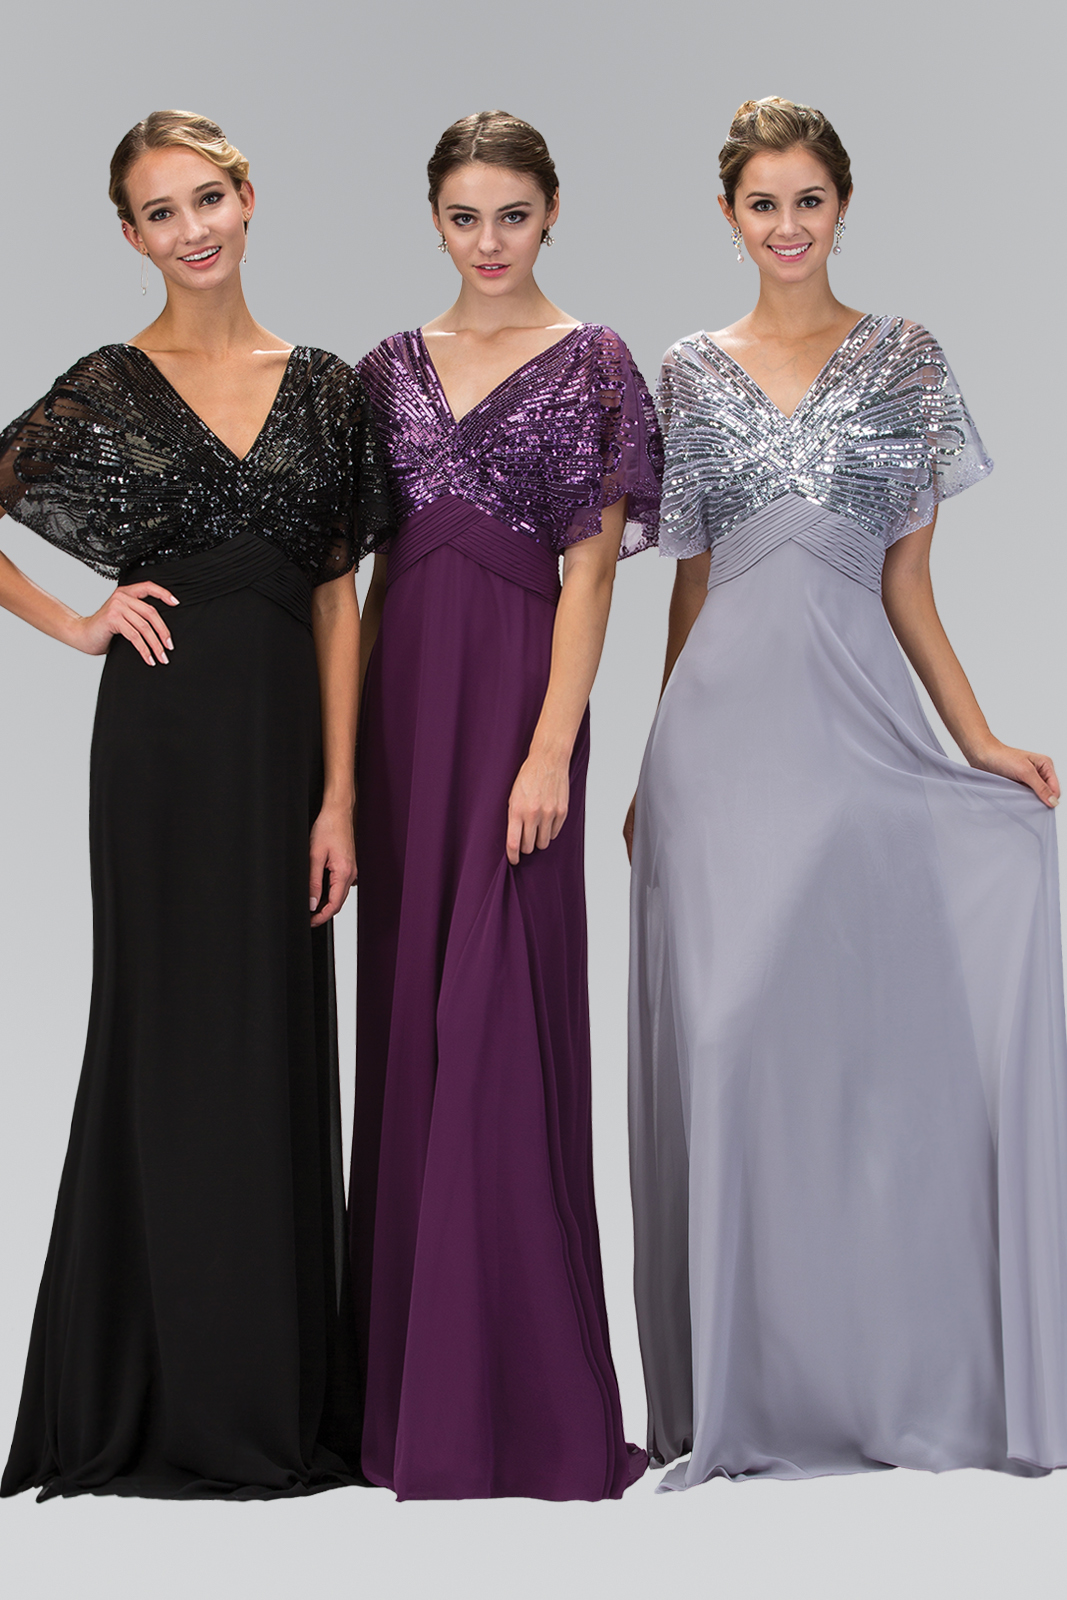 women in black, violet, and silver gowns